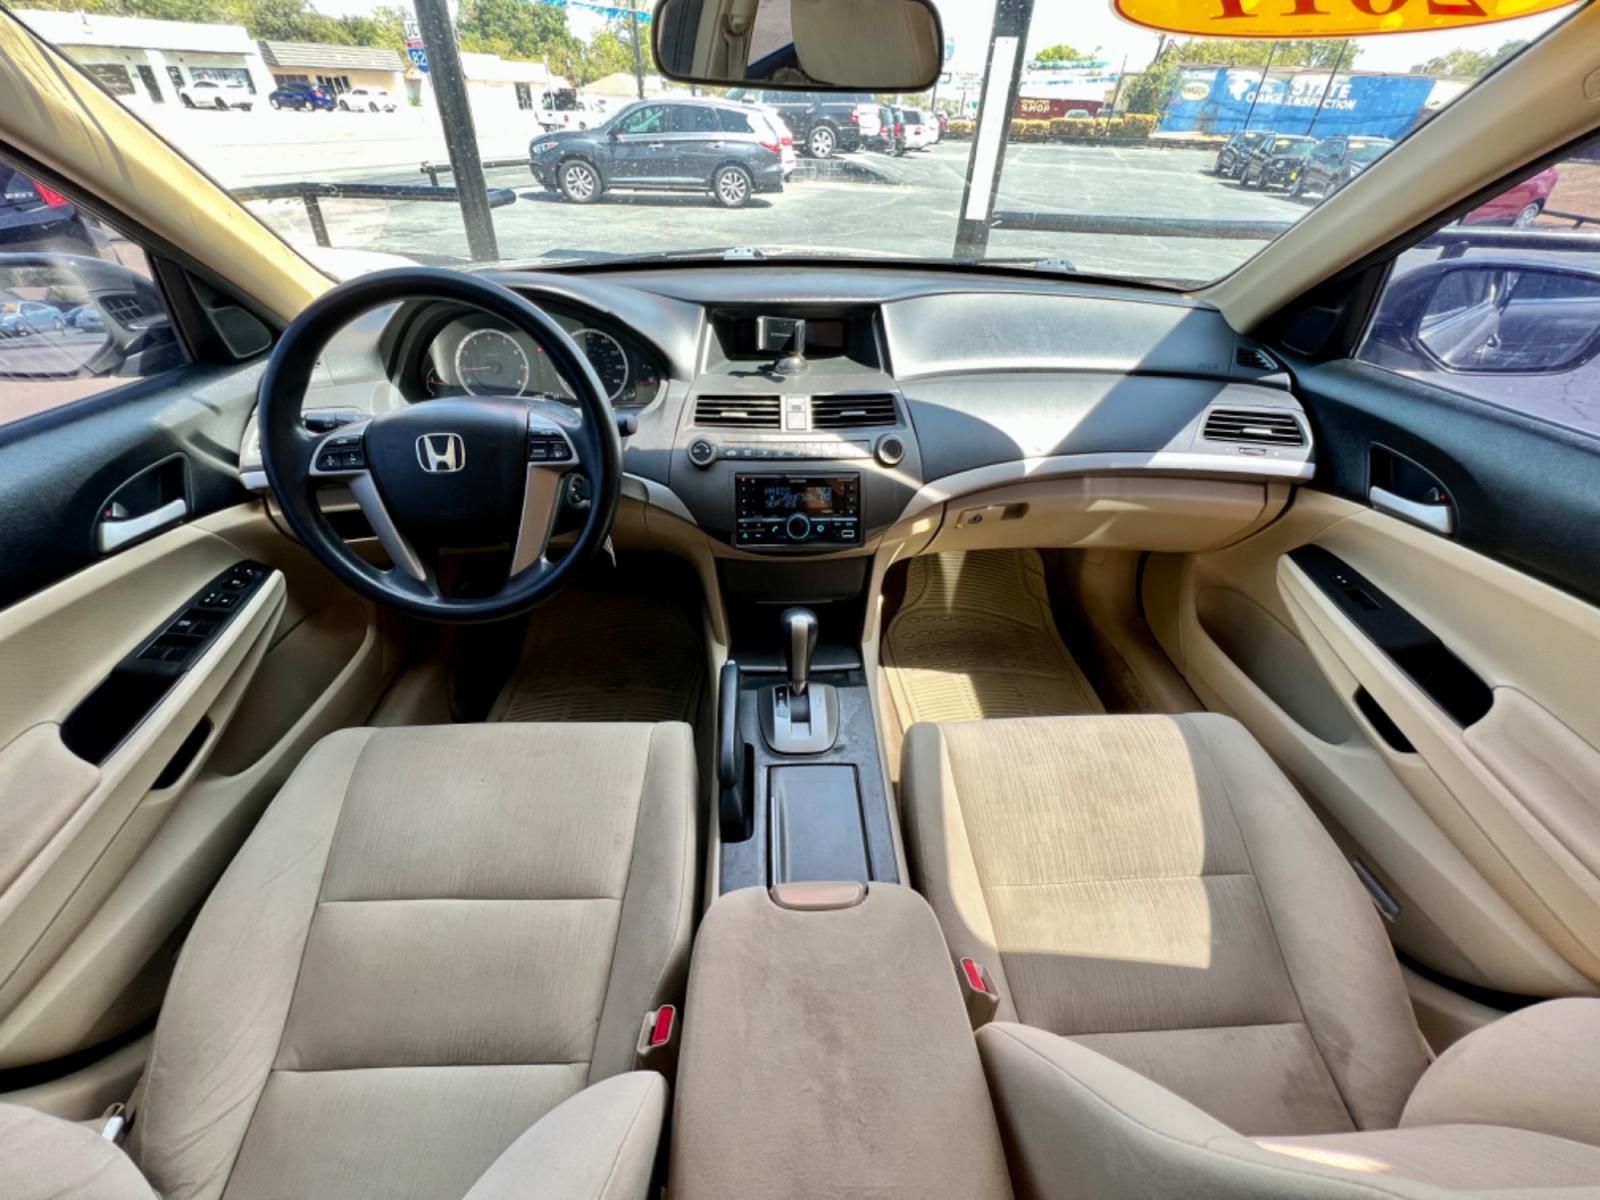 2011 GRAY HONDA ACCORD LX (1HGCP2F38BA) , located at 5900 E. Lancaster Ave., Fort Worth, TX, 76112, (817) 457-5456, 0.000000, 0.000000 - This is a 2011 HONDA ACCORD LX 4 DOOR SEDAN that is in excellent condition. There are no dents or scratches. The interior is clean with no rips or tears or stains. All power windows, door locks and seats. Ice cold AC for those hot Texas summer days. It is equipped with a CD player, AM/FM radio, AUX - Photo #16